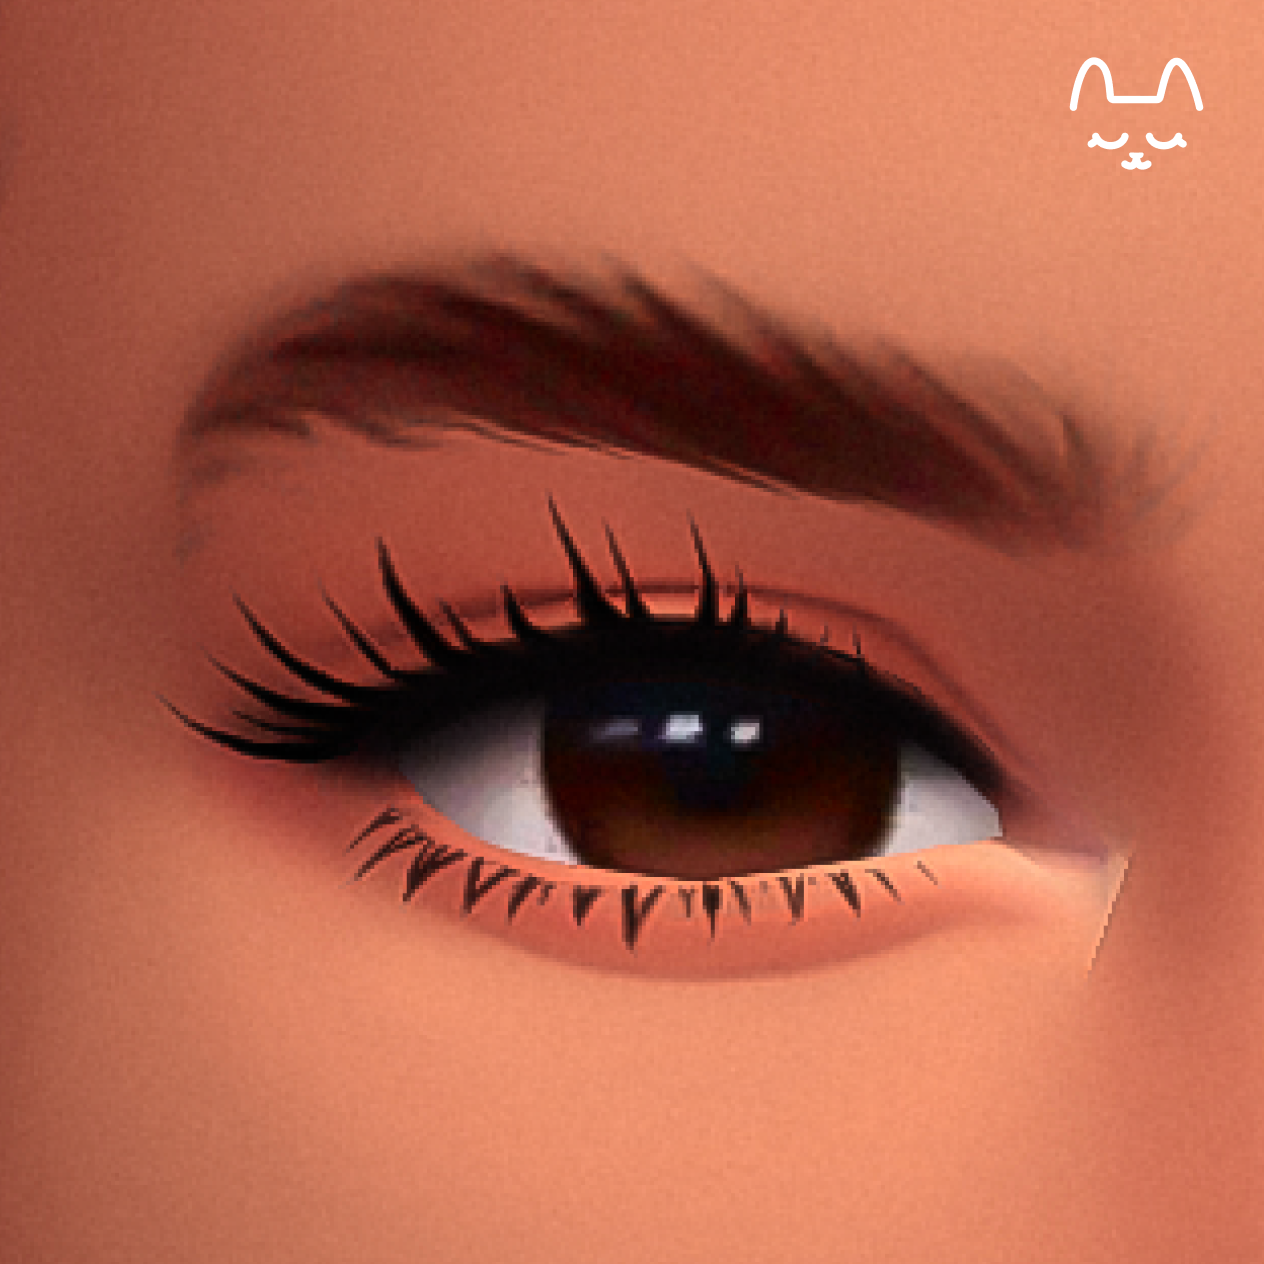 Lush Brows project avatar